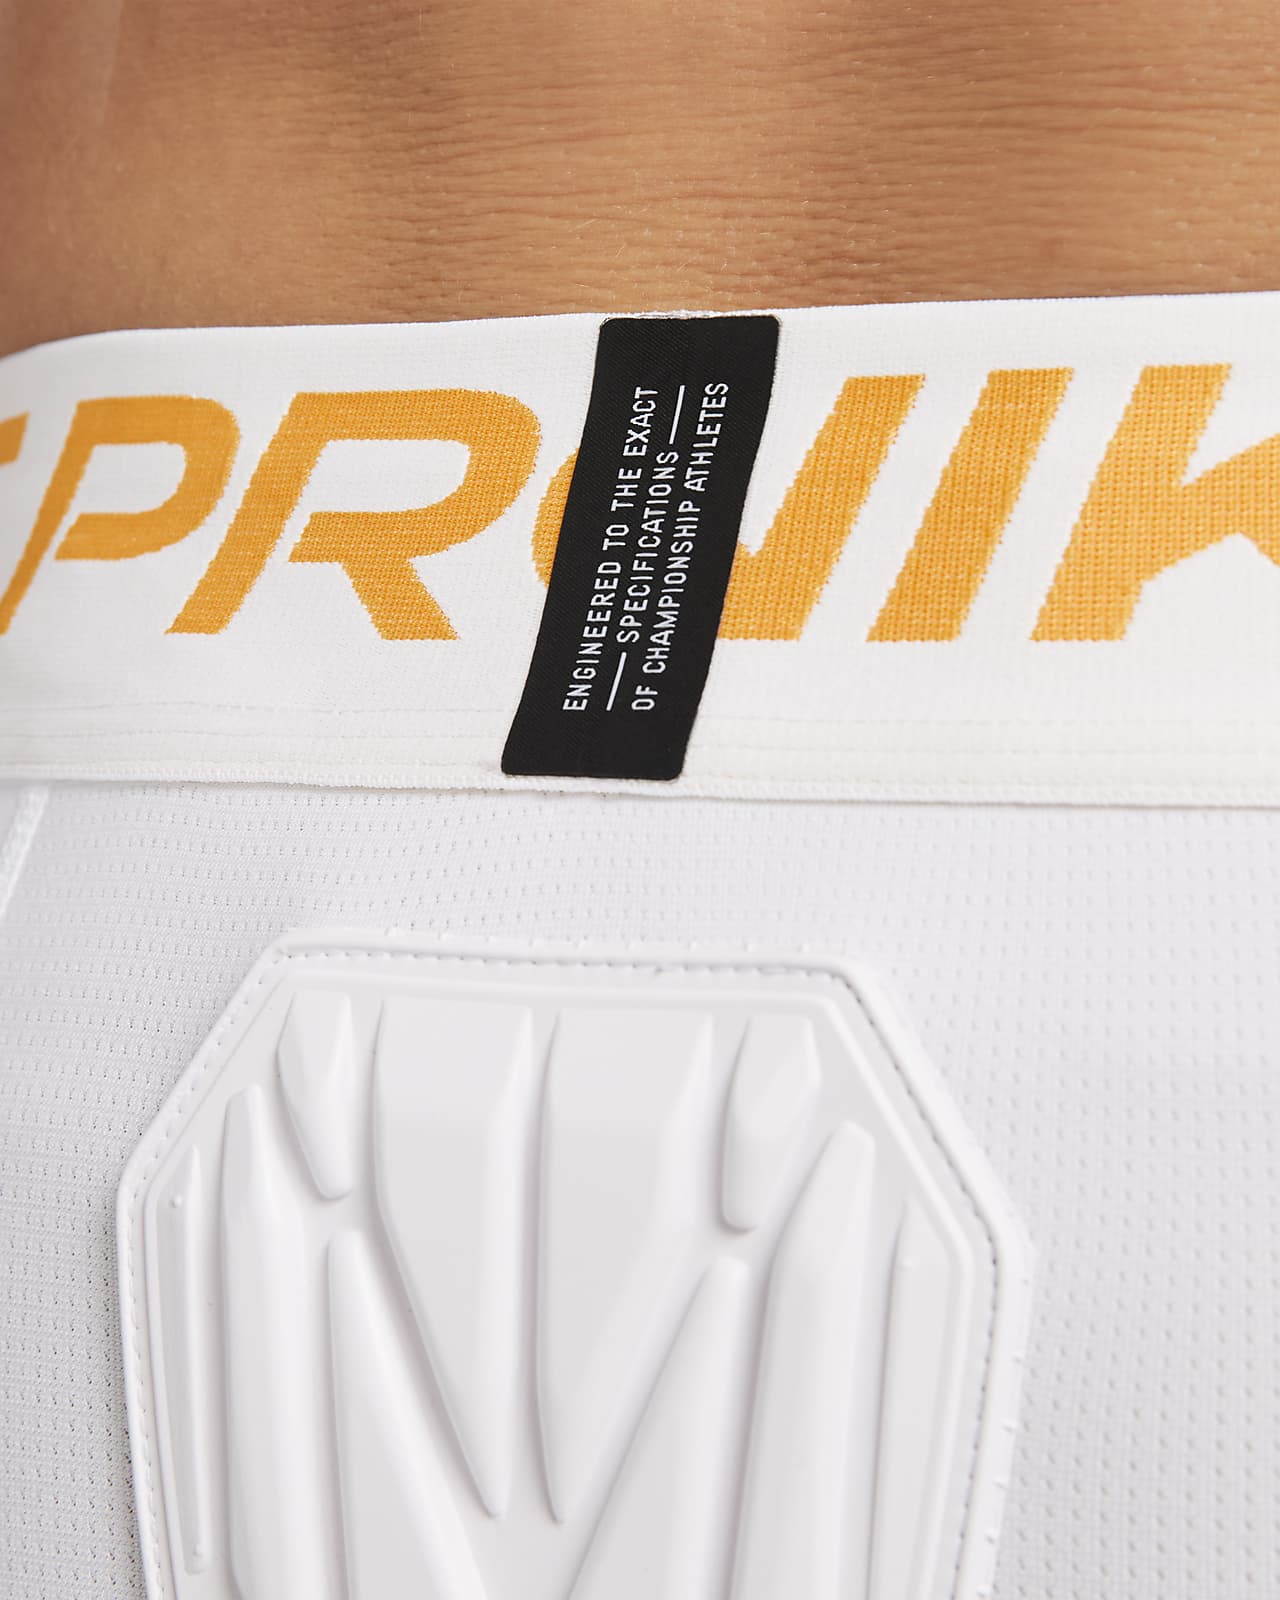 NIKE PRO combat COMPRESSION tank top L 2XL pads Hyperstrong Football White